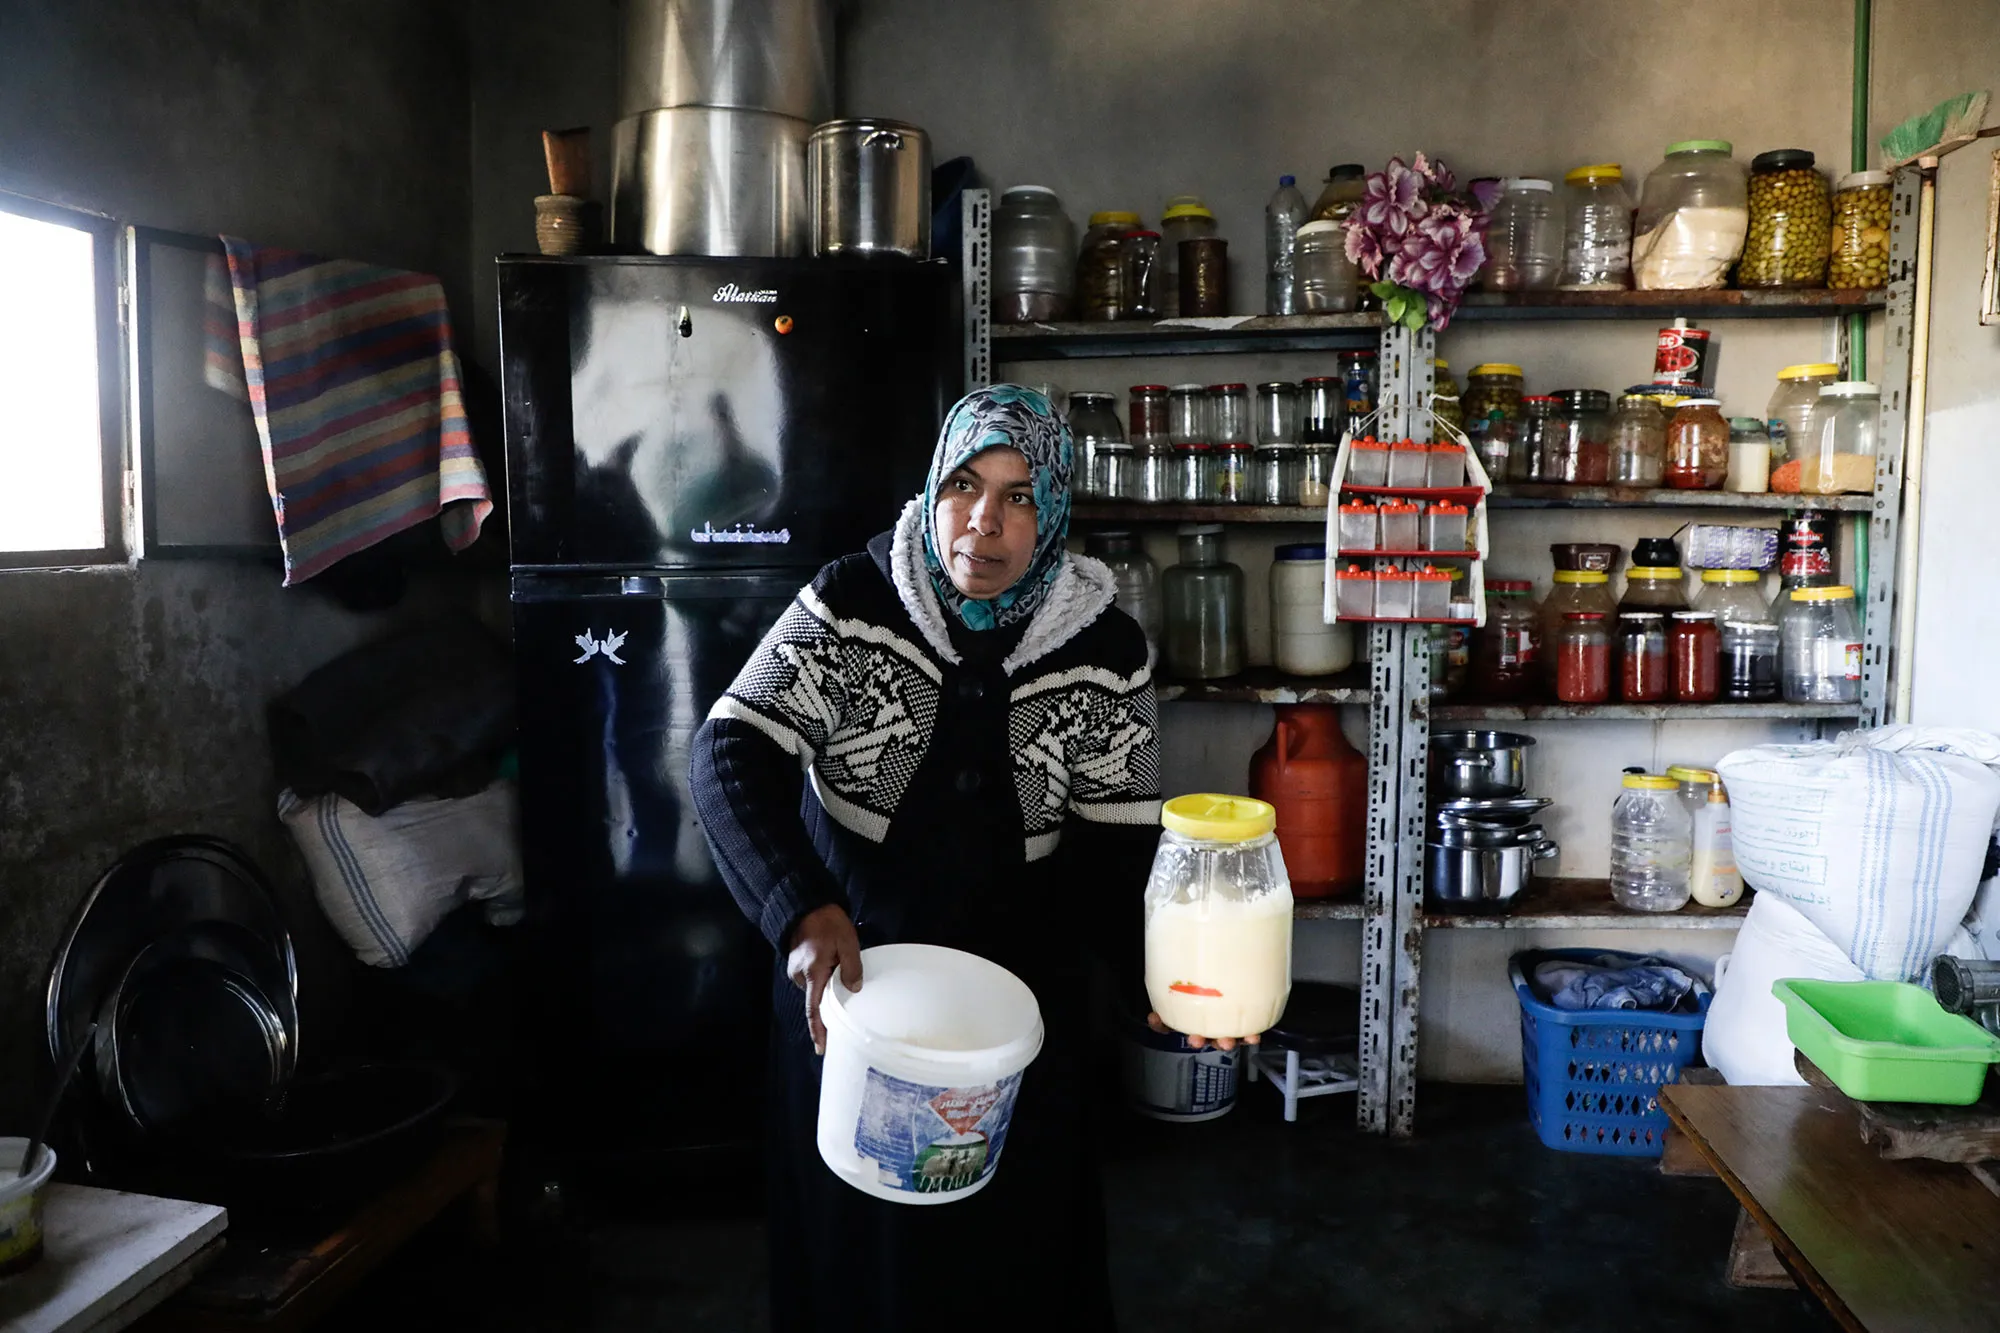 With CARE’s support for women, as part of the Syria Resilience Consortium, Salma received training and a business grant to start her work. She bought a cow and all the necessary tools and equipment. Photo: Abdullah Hammam/Syria Resilience Consortium